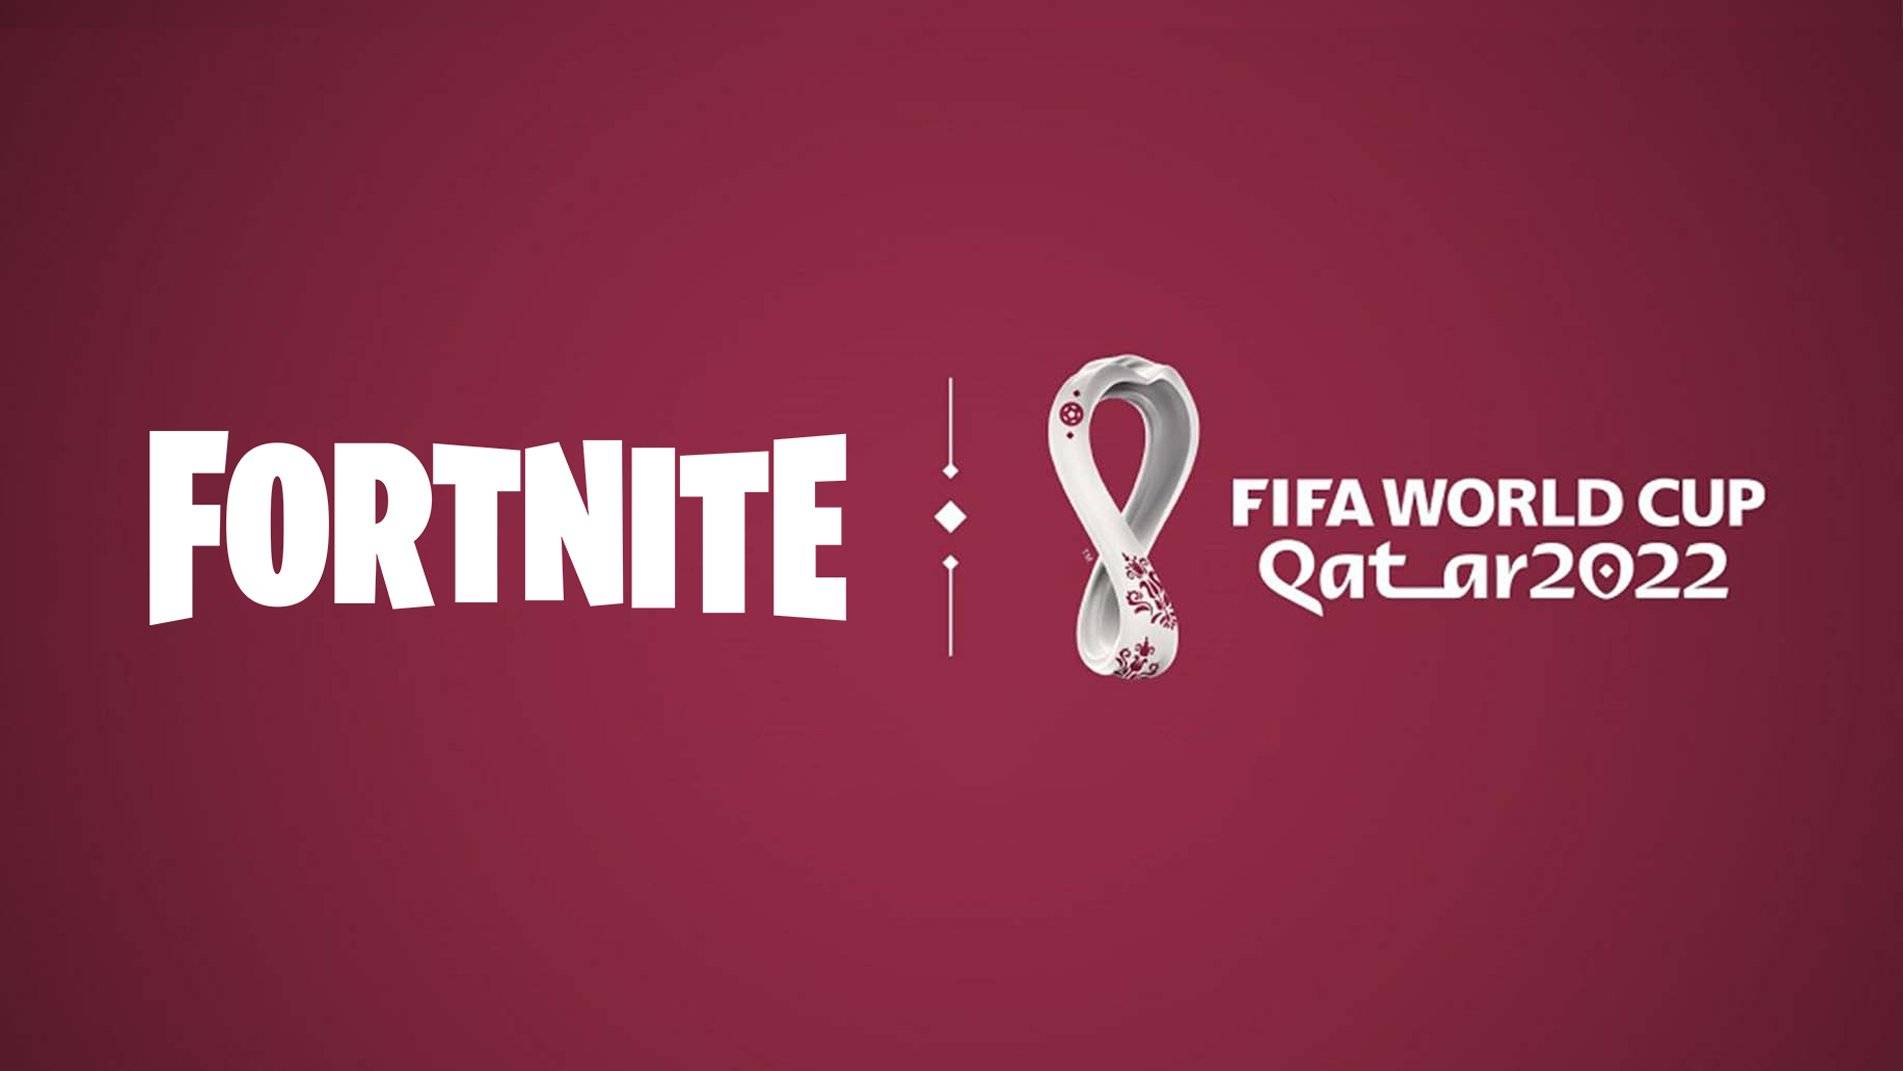 Fortnite x World Cup 'Let Them Know' challenges: how to complete